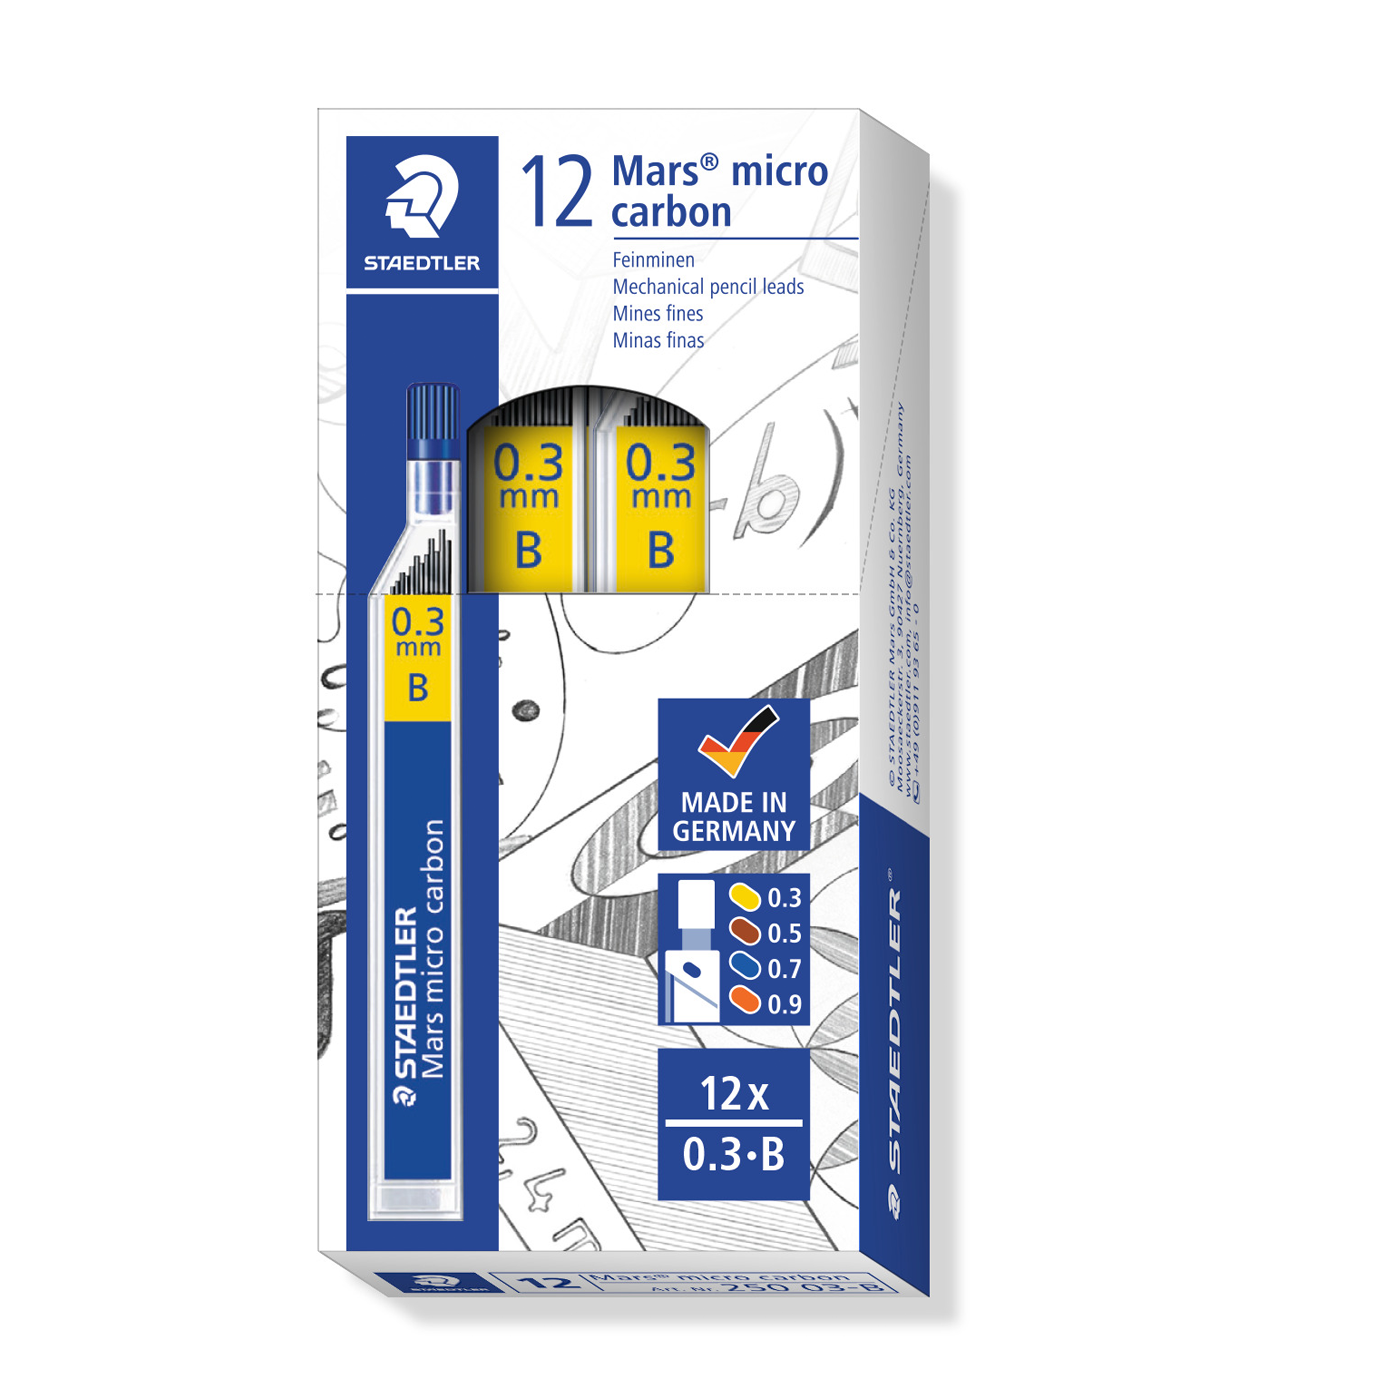 Staedtler Mechanical Pencil Leads Refill 0.3mm Mars Micro Box of 12 Tubes B